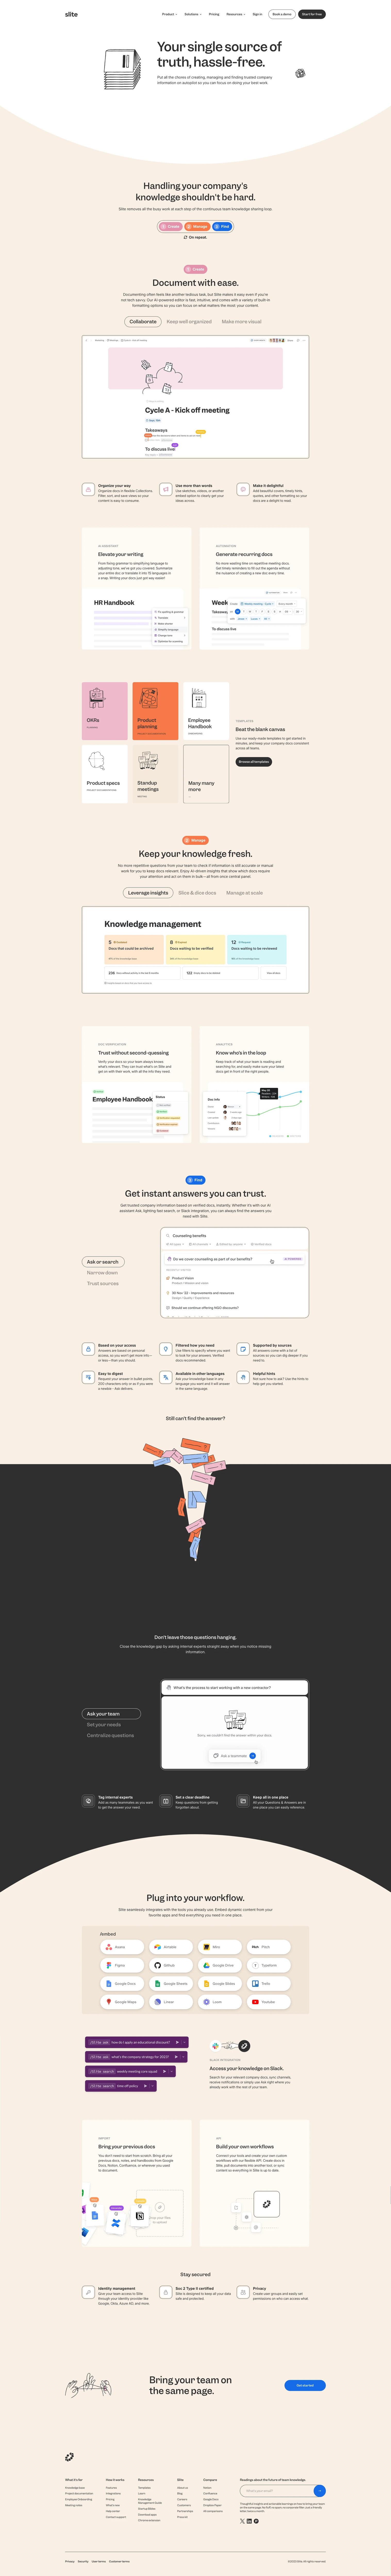 Slite Landing Page Example: Your company knowledge base, on autopilot. Free up your team from the burdens of creating, managing and finding trusted company information. Single source of truth is finally possible with Slite's collaborative knowledge base, powered by AI.